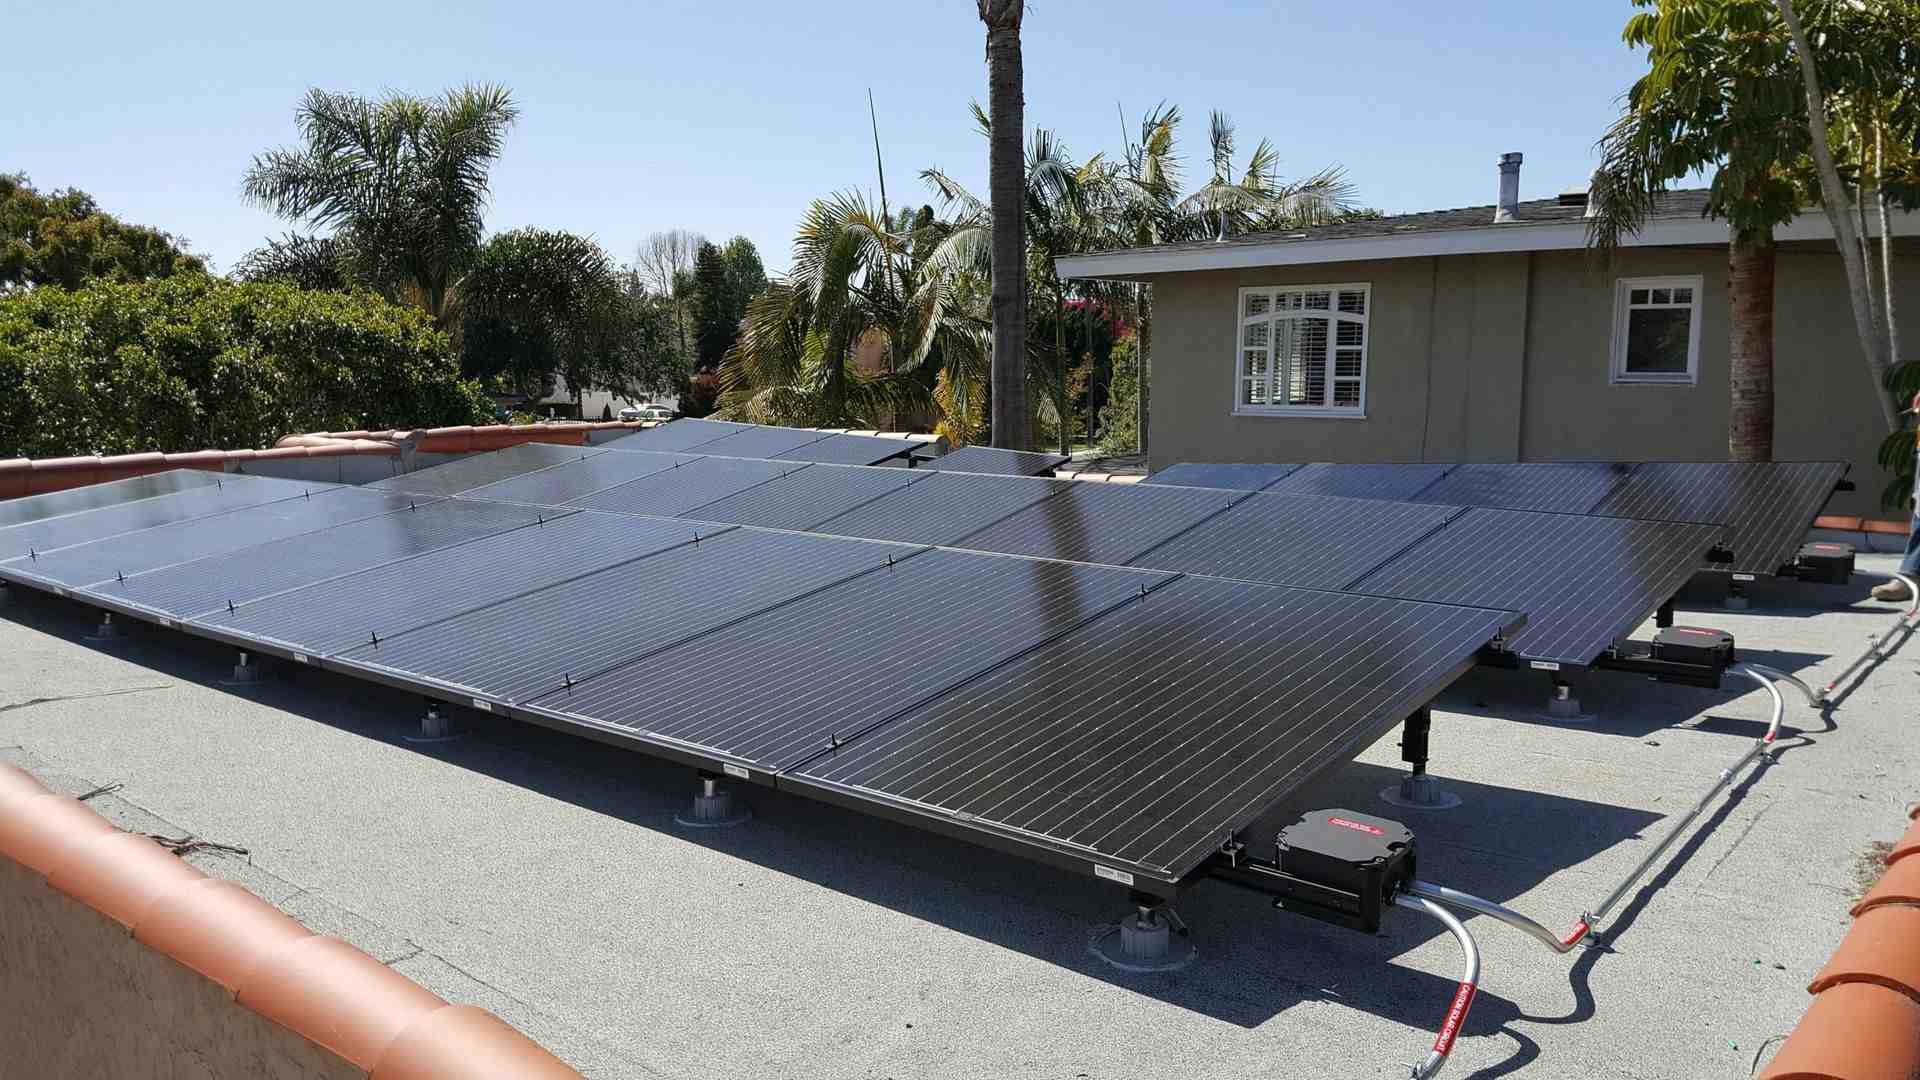 What is the best solar panel company to go with?